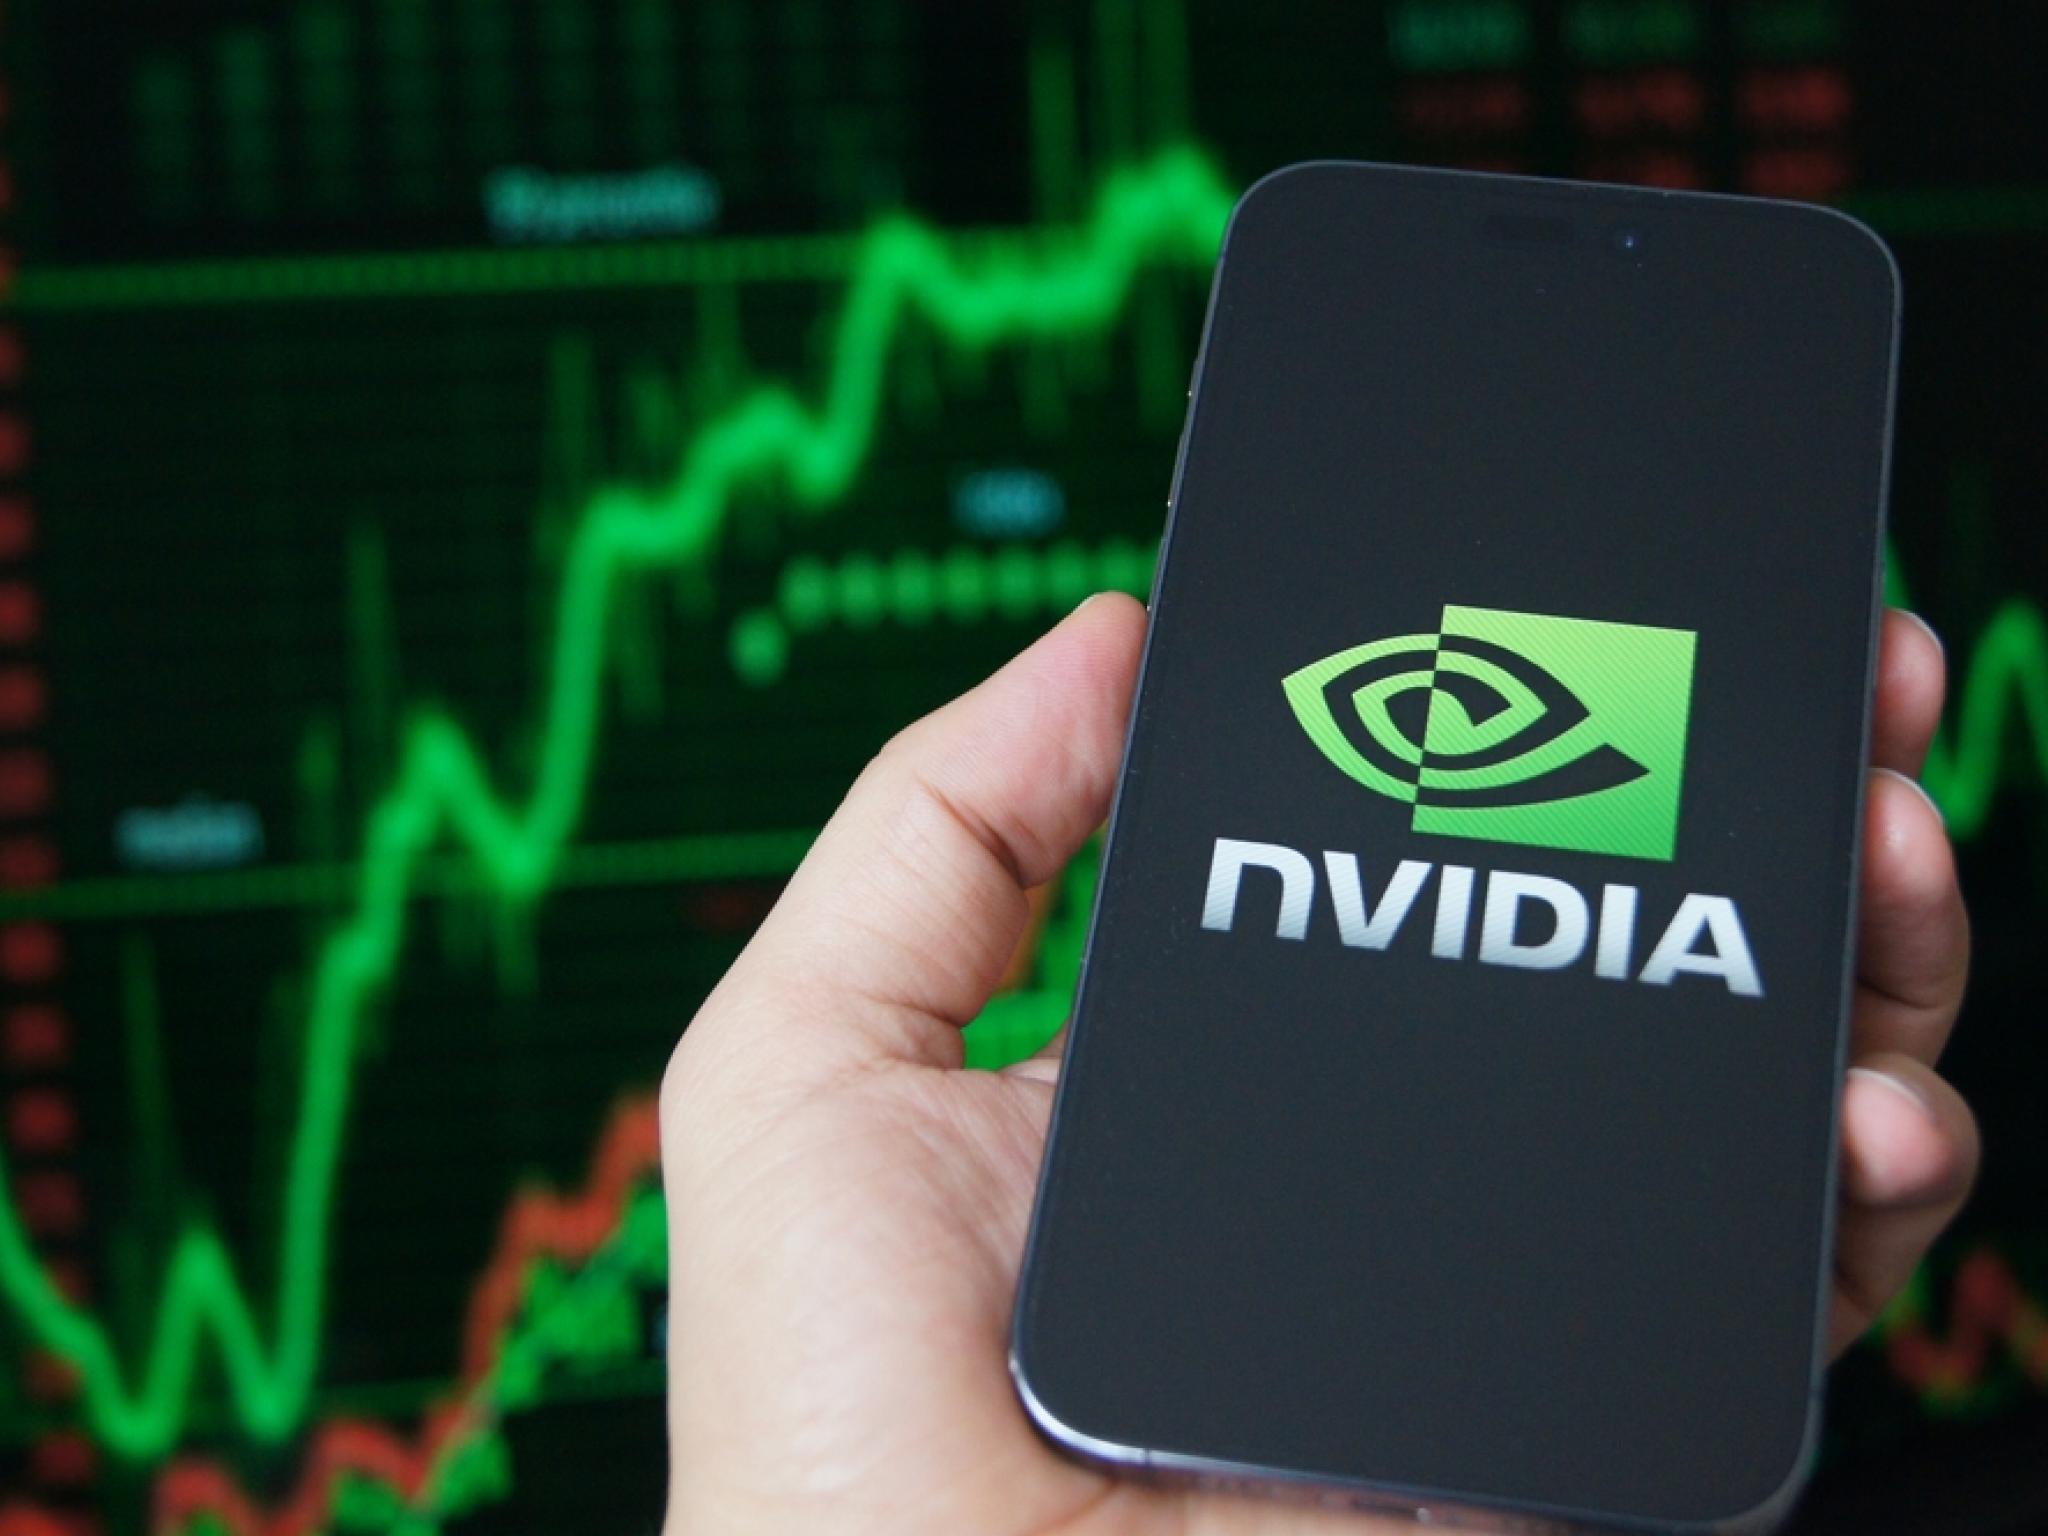  nvidia-stock-zooms-past-1000-lifts-amd-shares-whats-powering-ai-chip-plays-premarket 